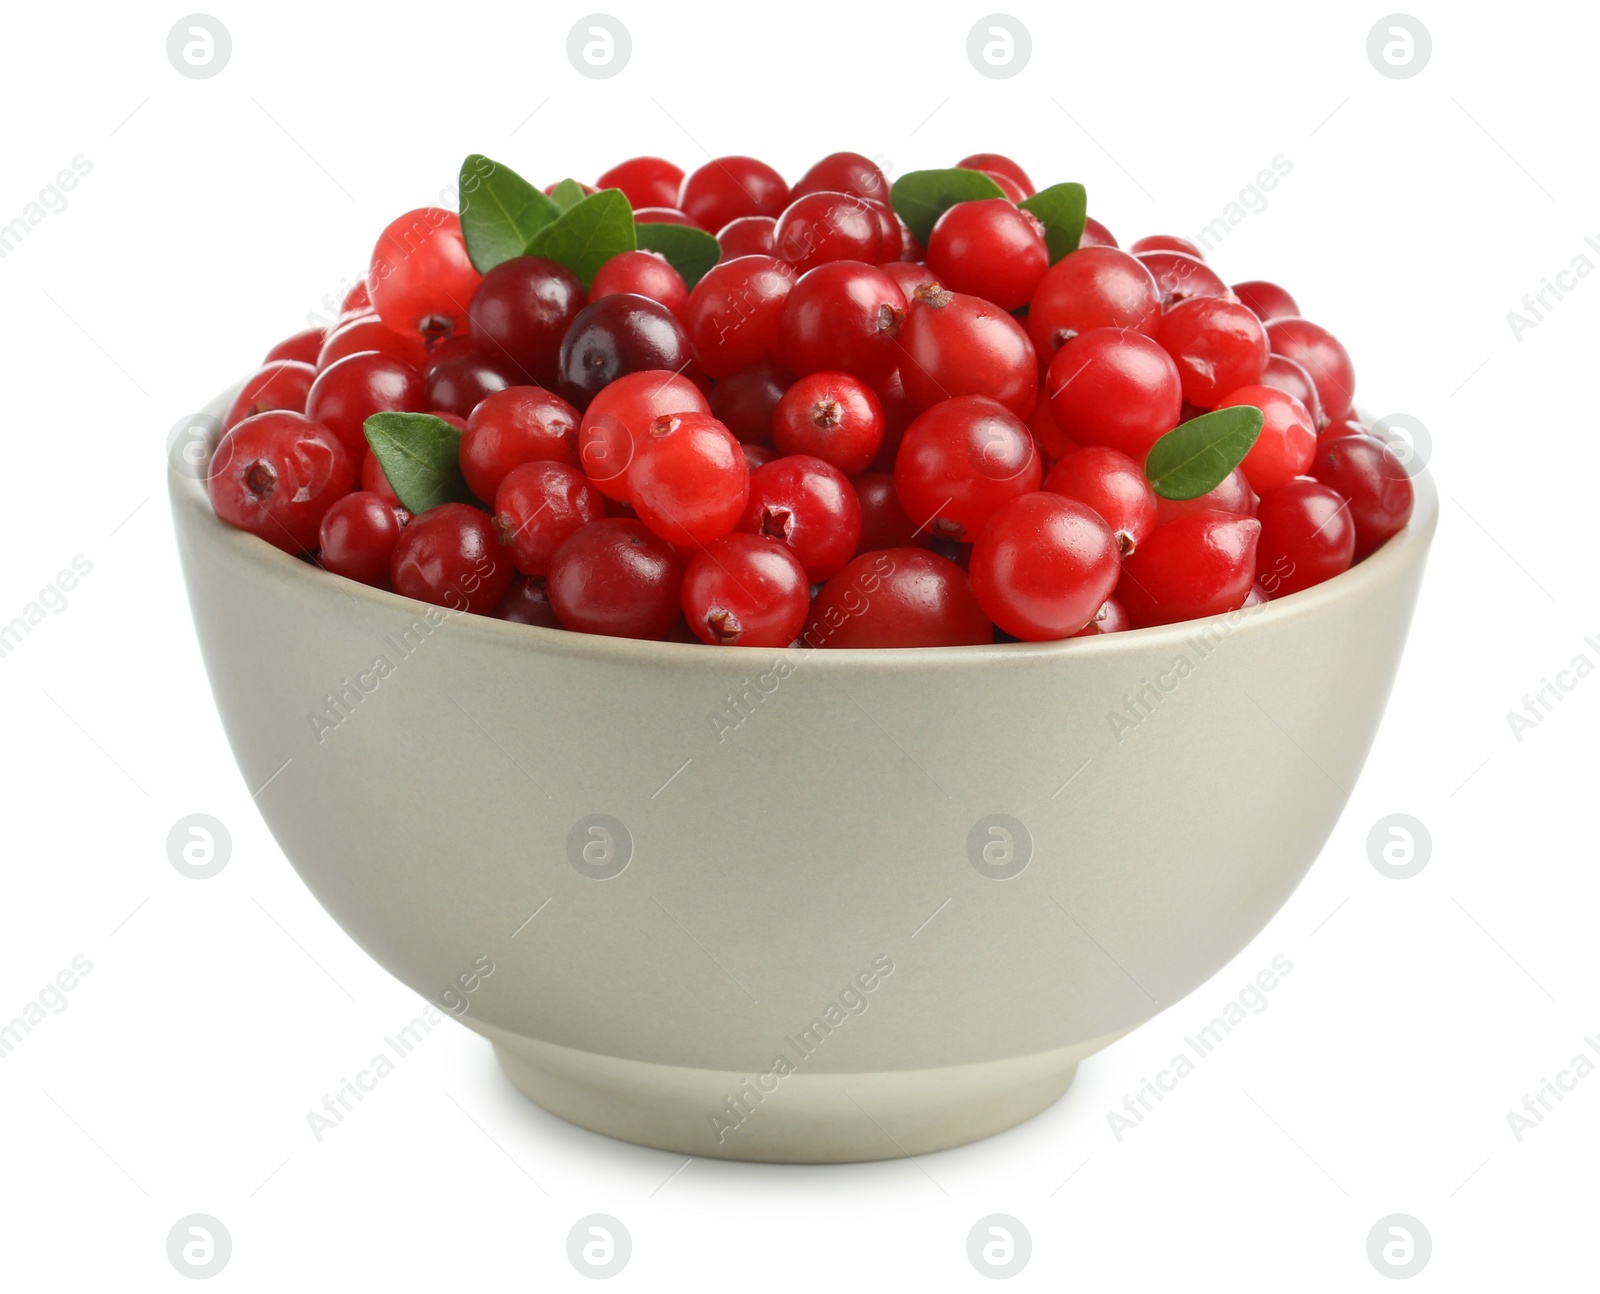 Photo of Bowl of fresh ripe cranberries with leaves isolated on white